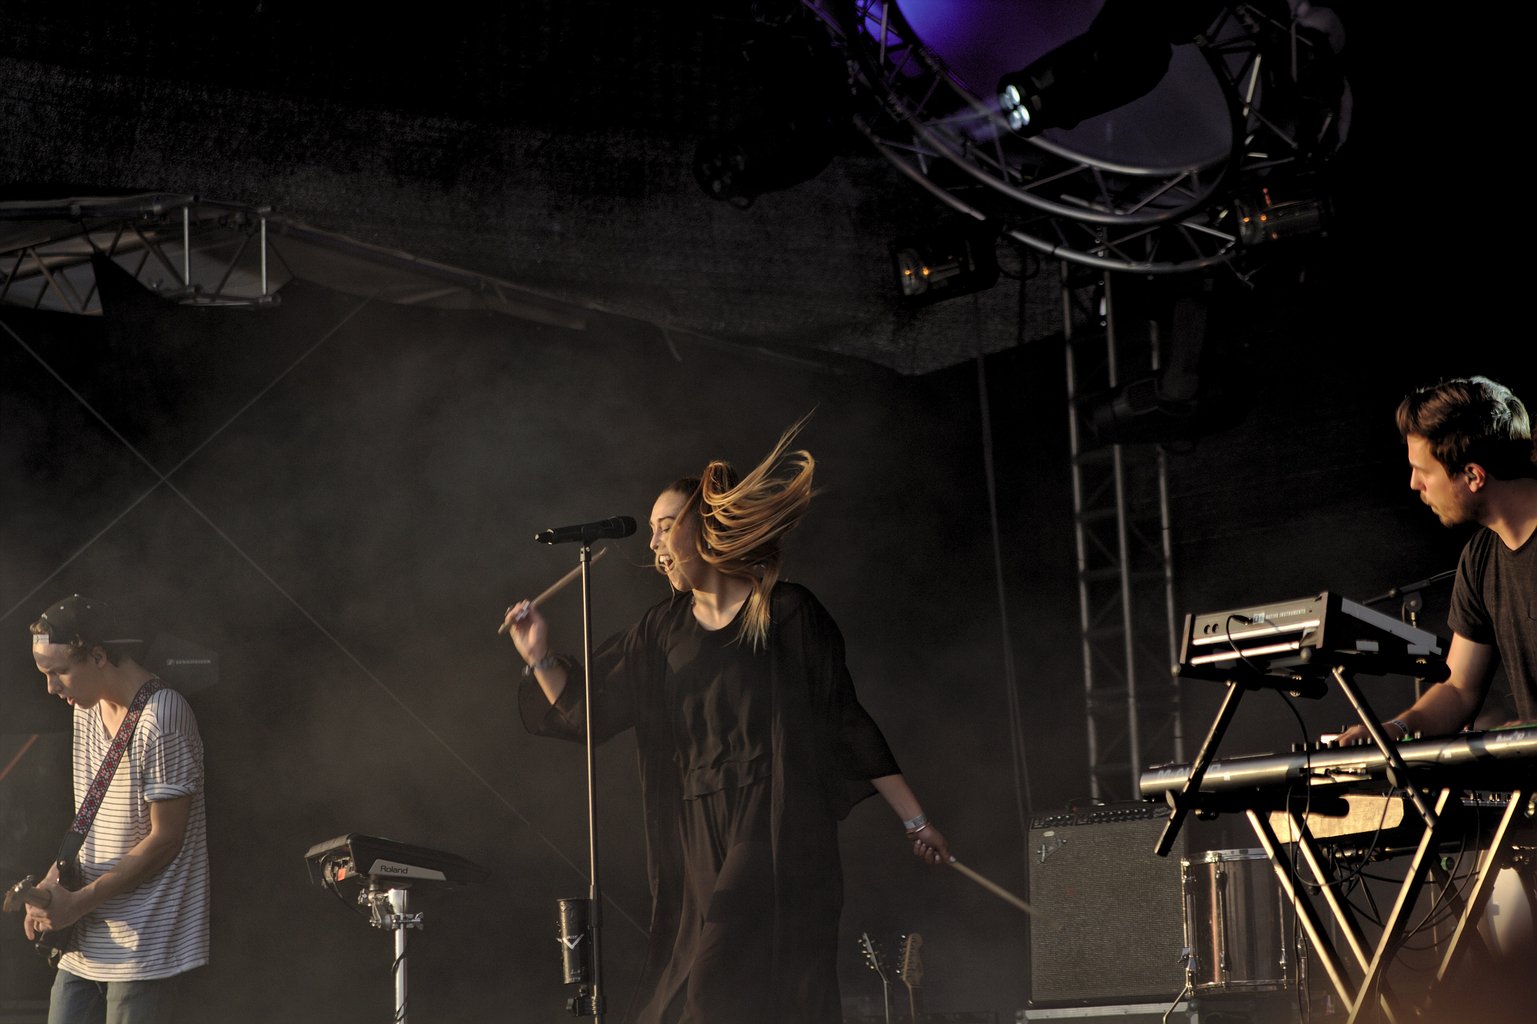 Claire singer Josie is about to hit a drumpad, her hair flying through the air. Guitarist and keyboarder are visible at the edges